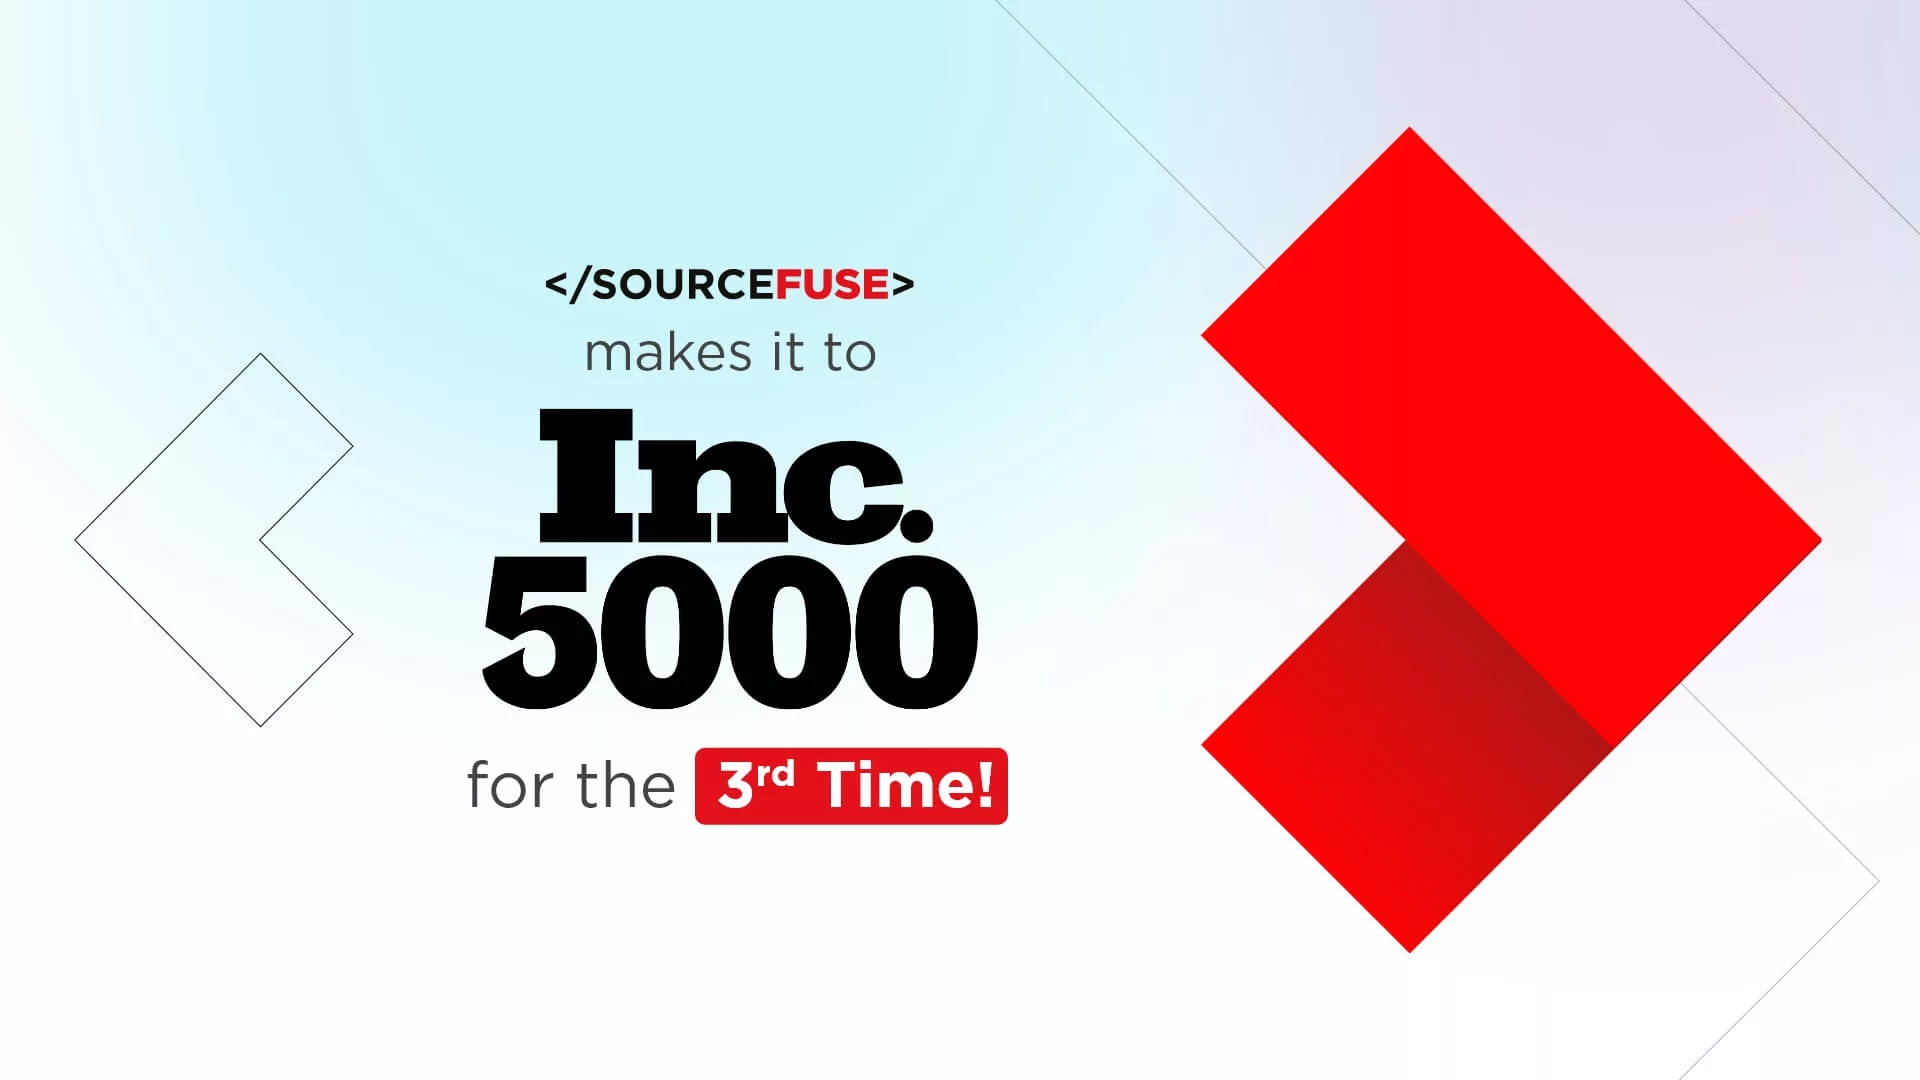 SourceFuse makes it to the Inc. 5000 List for the 3rd Time!